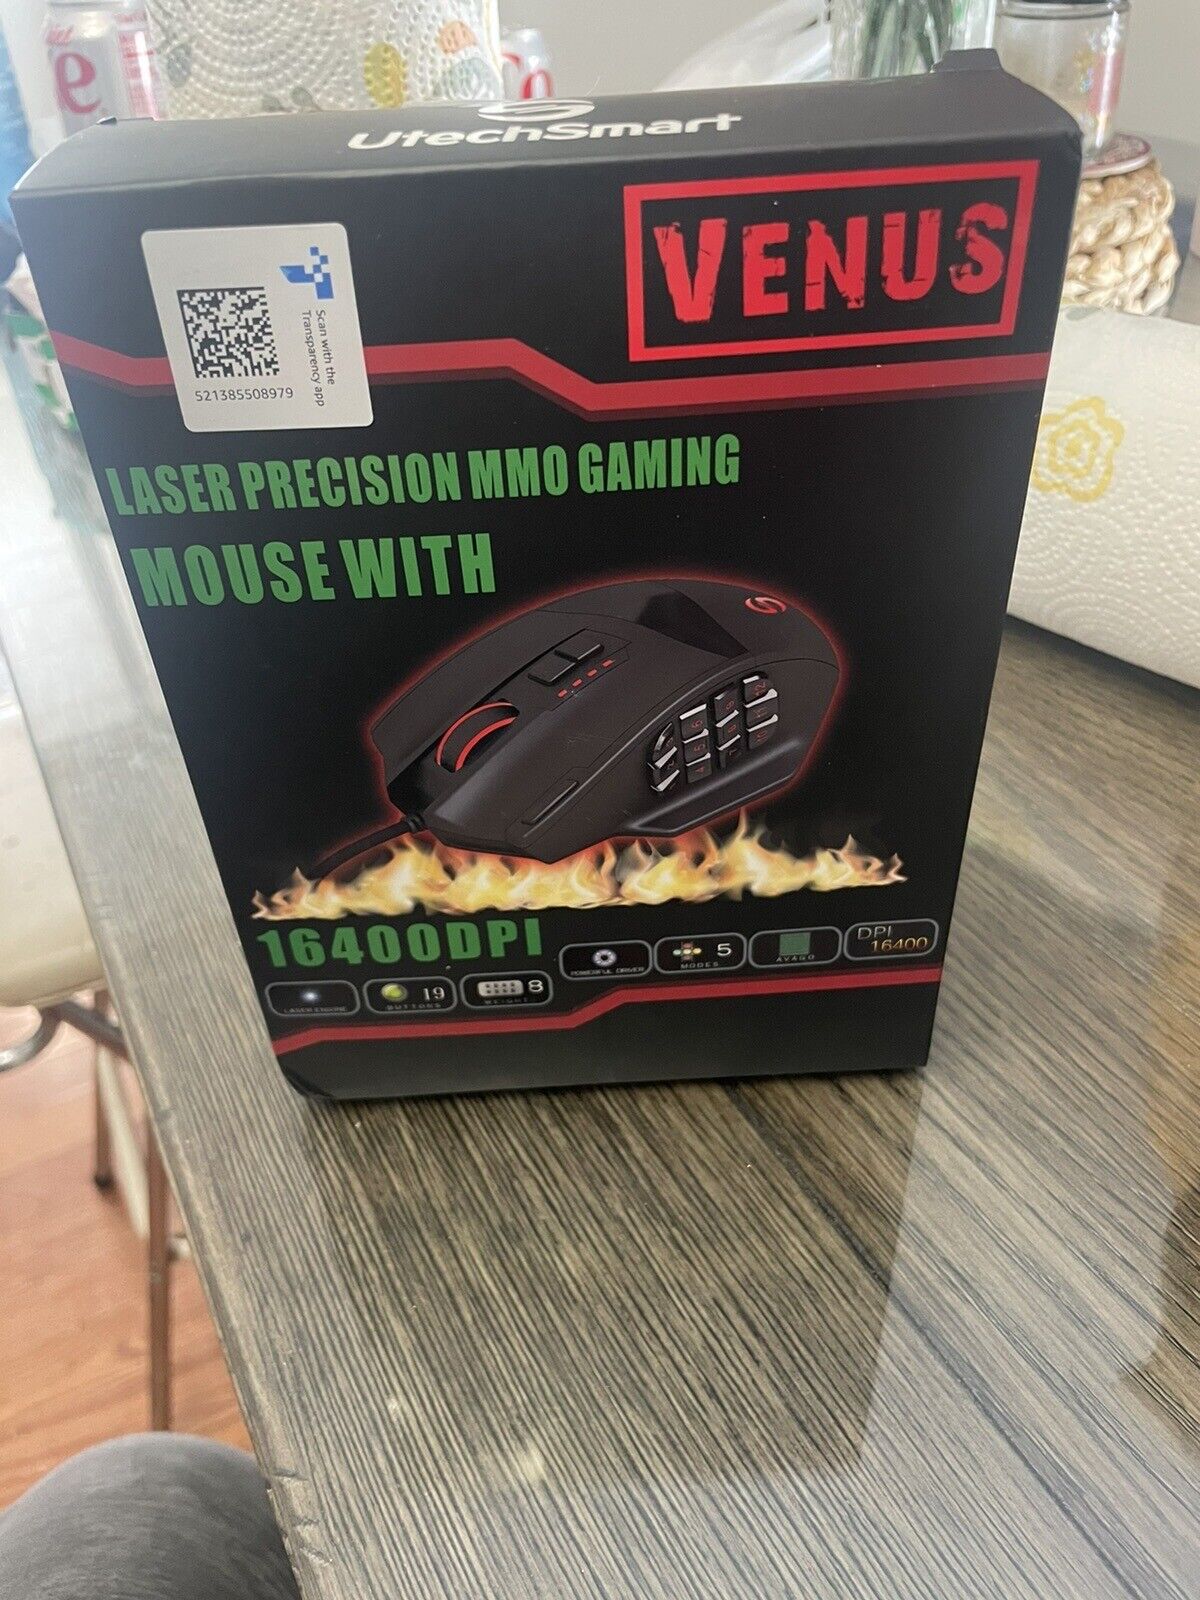 UtechSmart Venus Laser Precision MMO Gaming Mouse US-D16400-GM